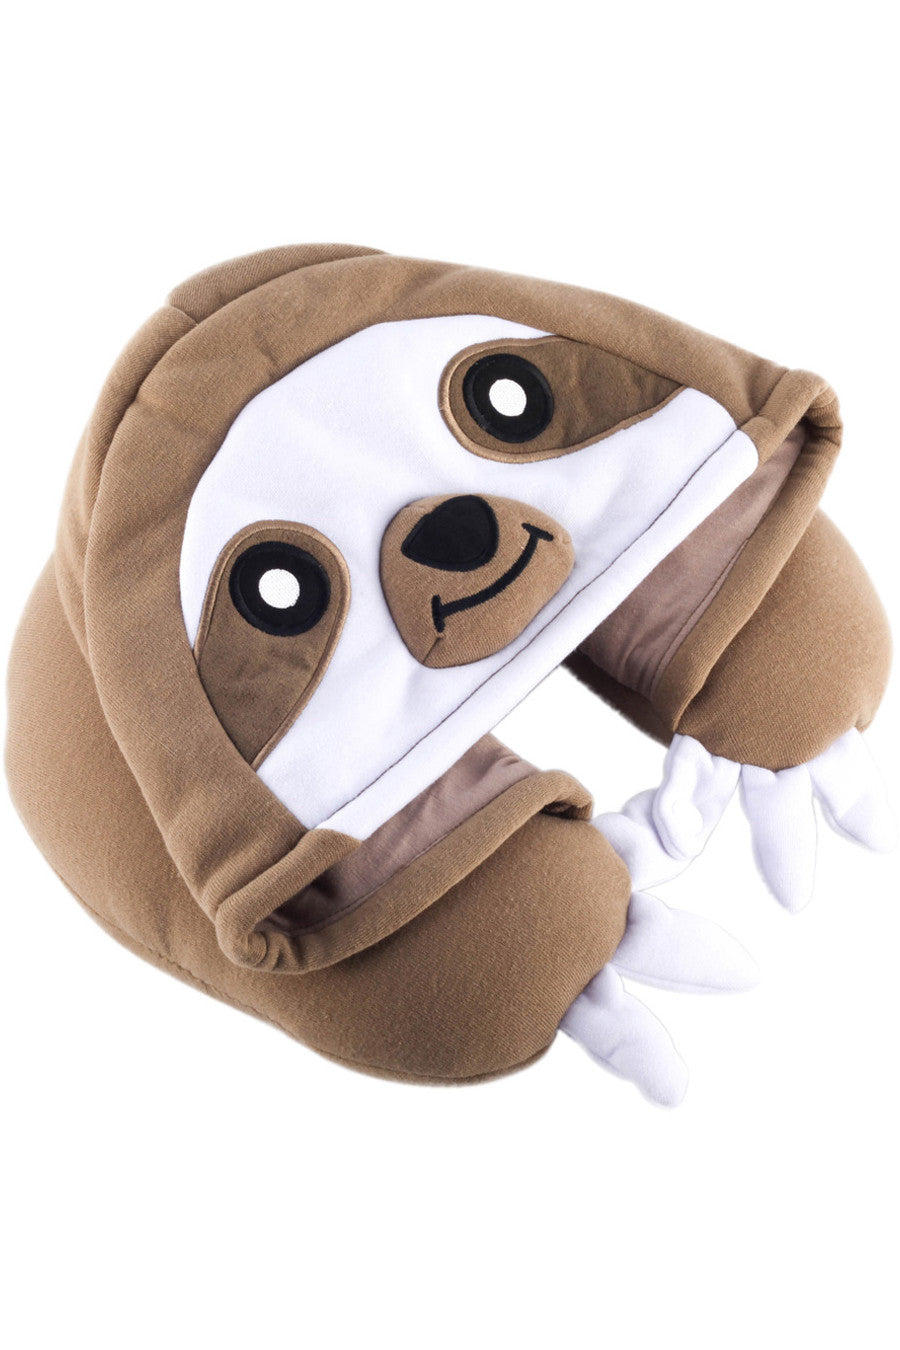 animal neck pillow with hood